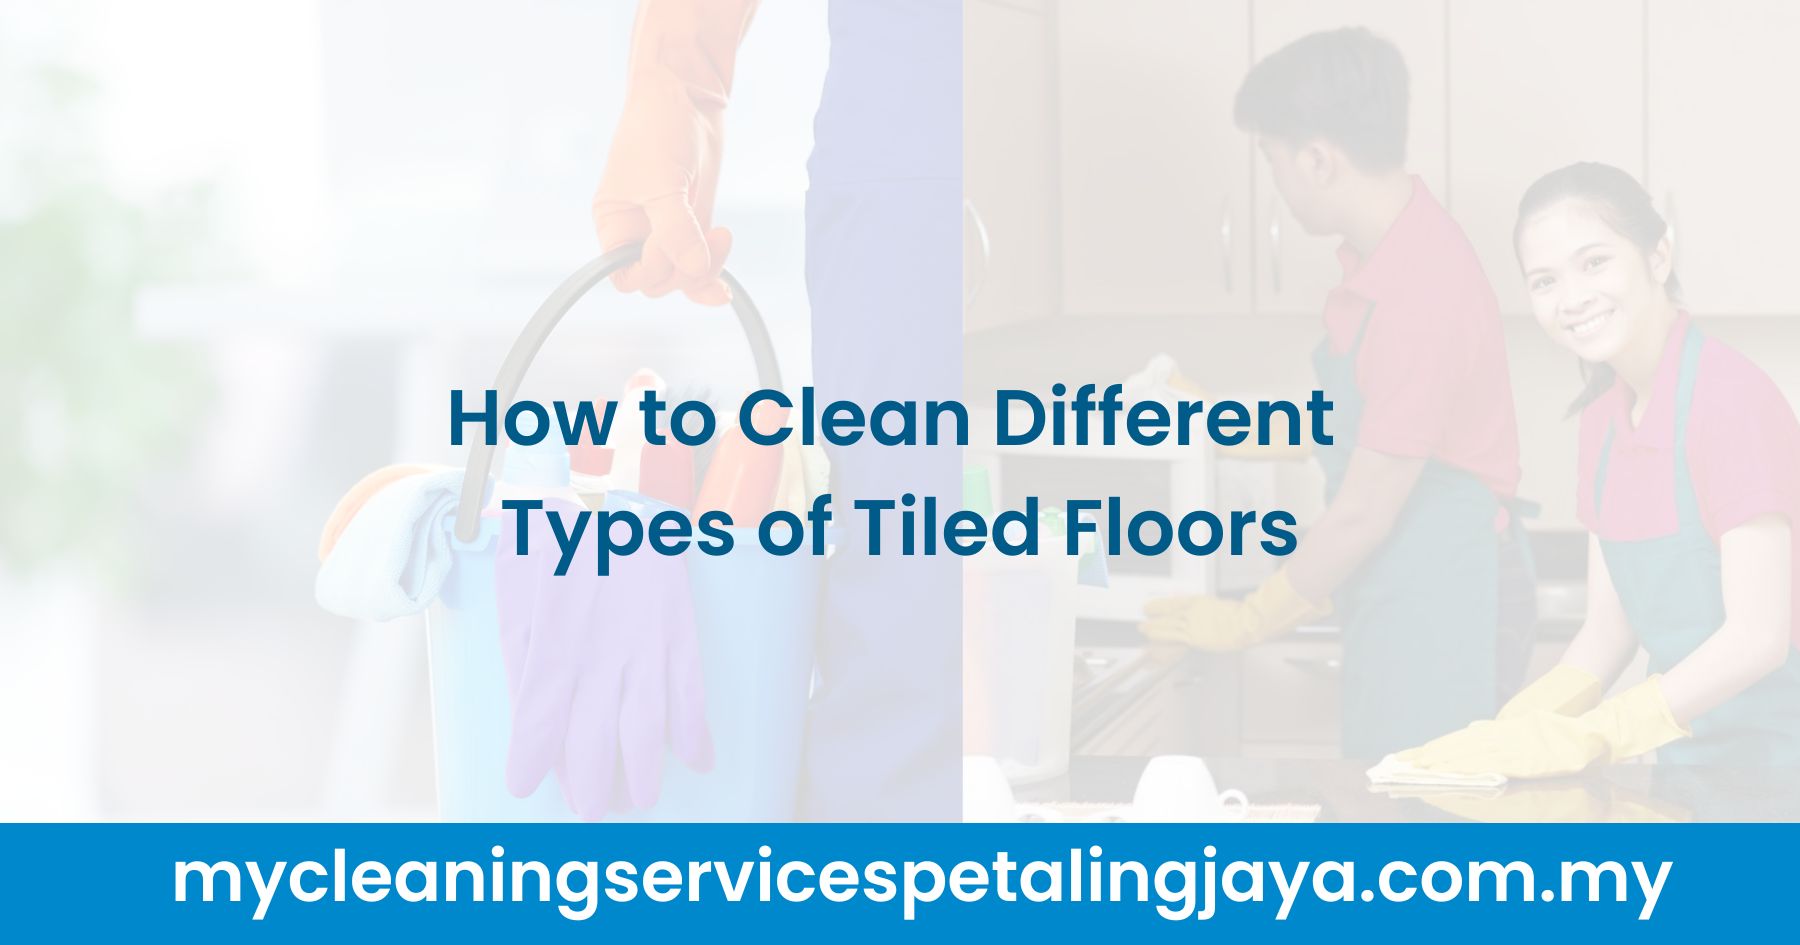 How to Clean Different Types of Tiled Floors